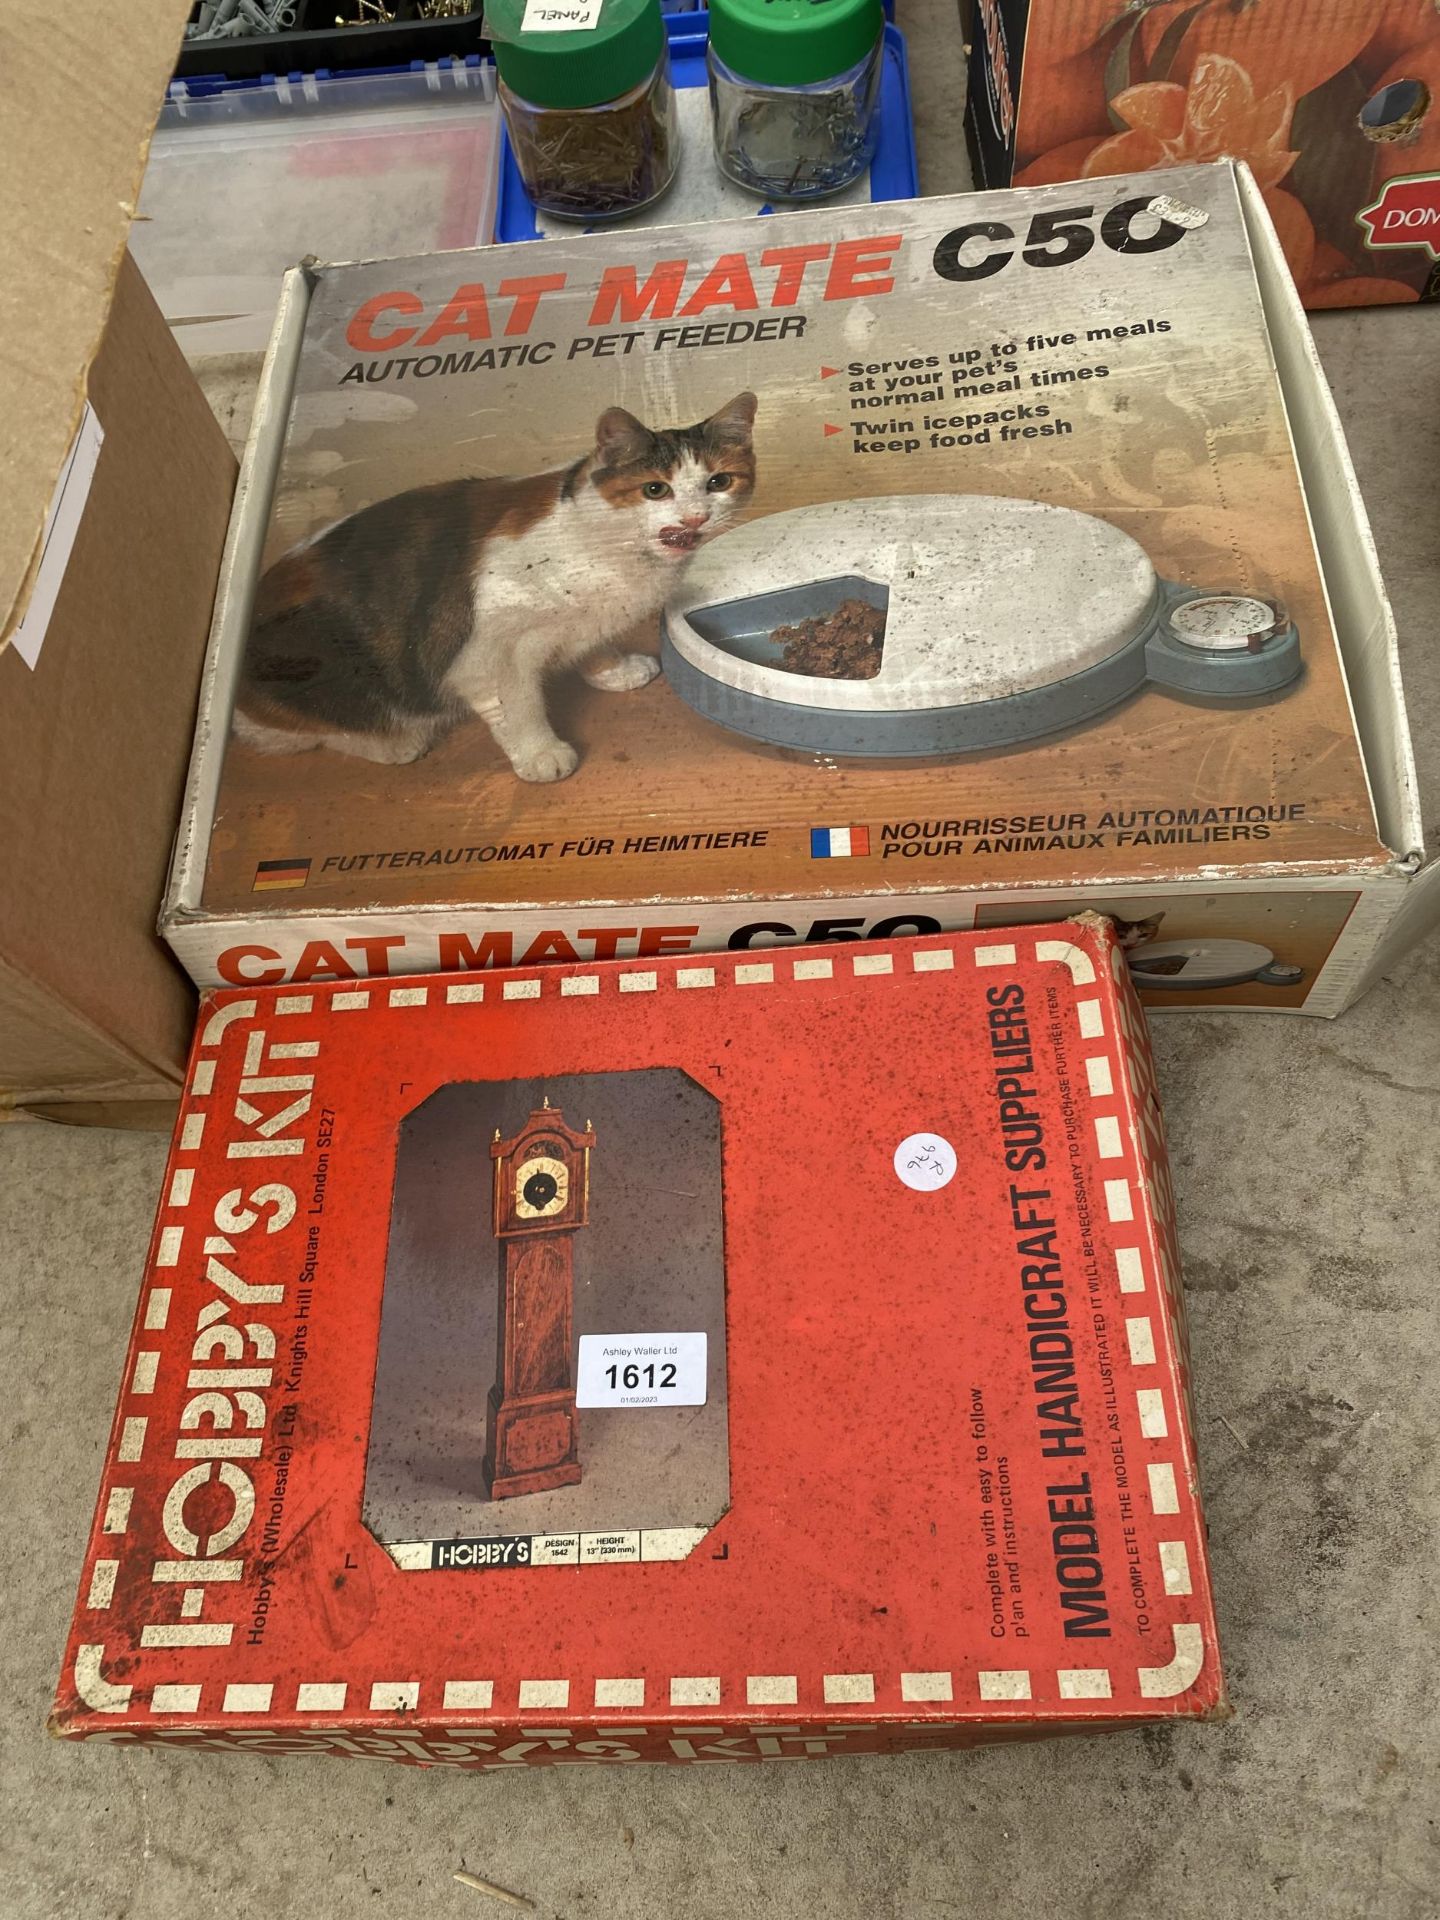 A HOBBY'S KIT AND A CAT MATE PET FEEDER